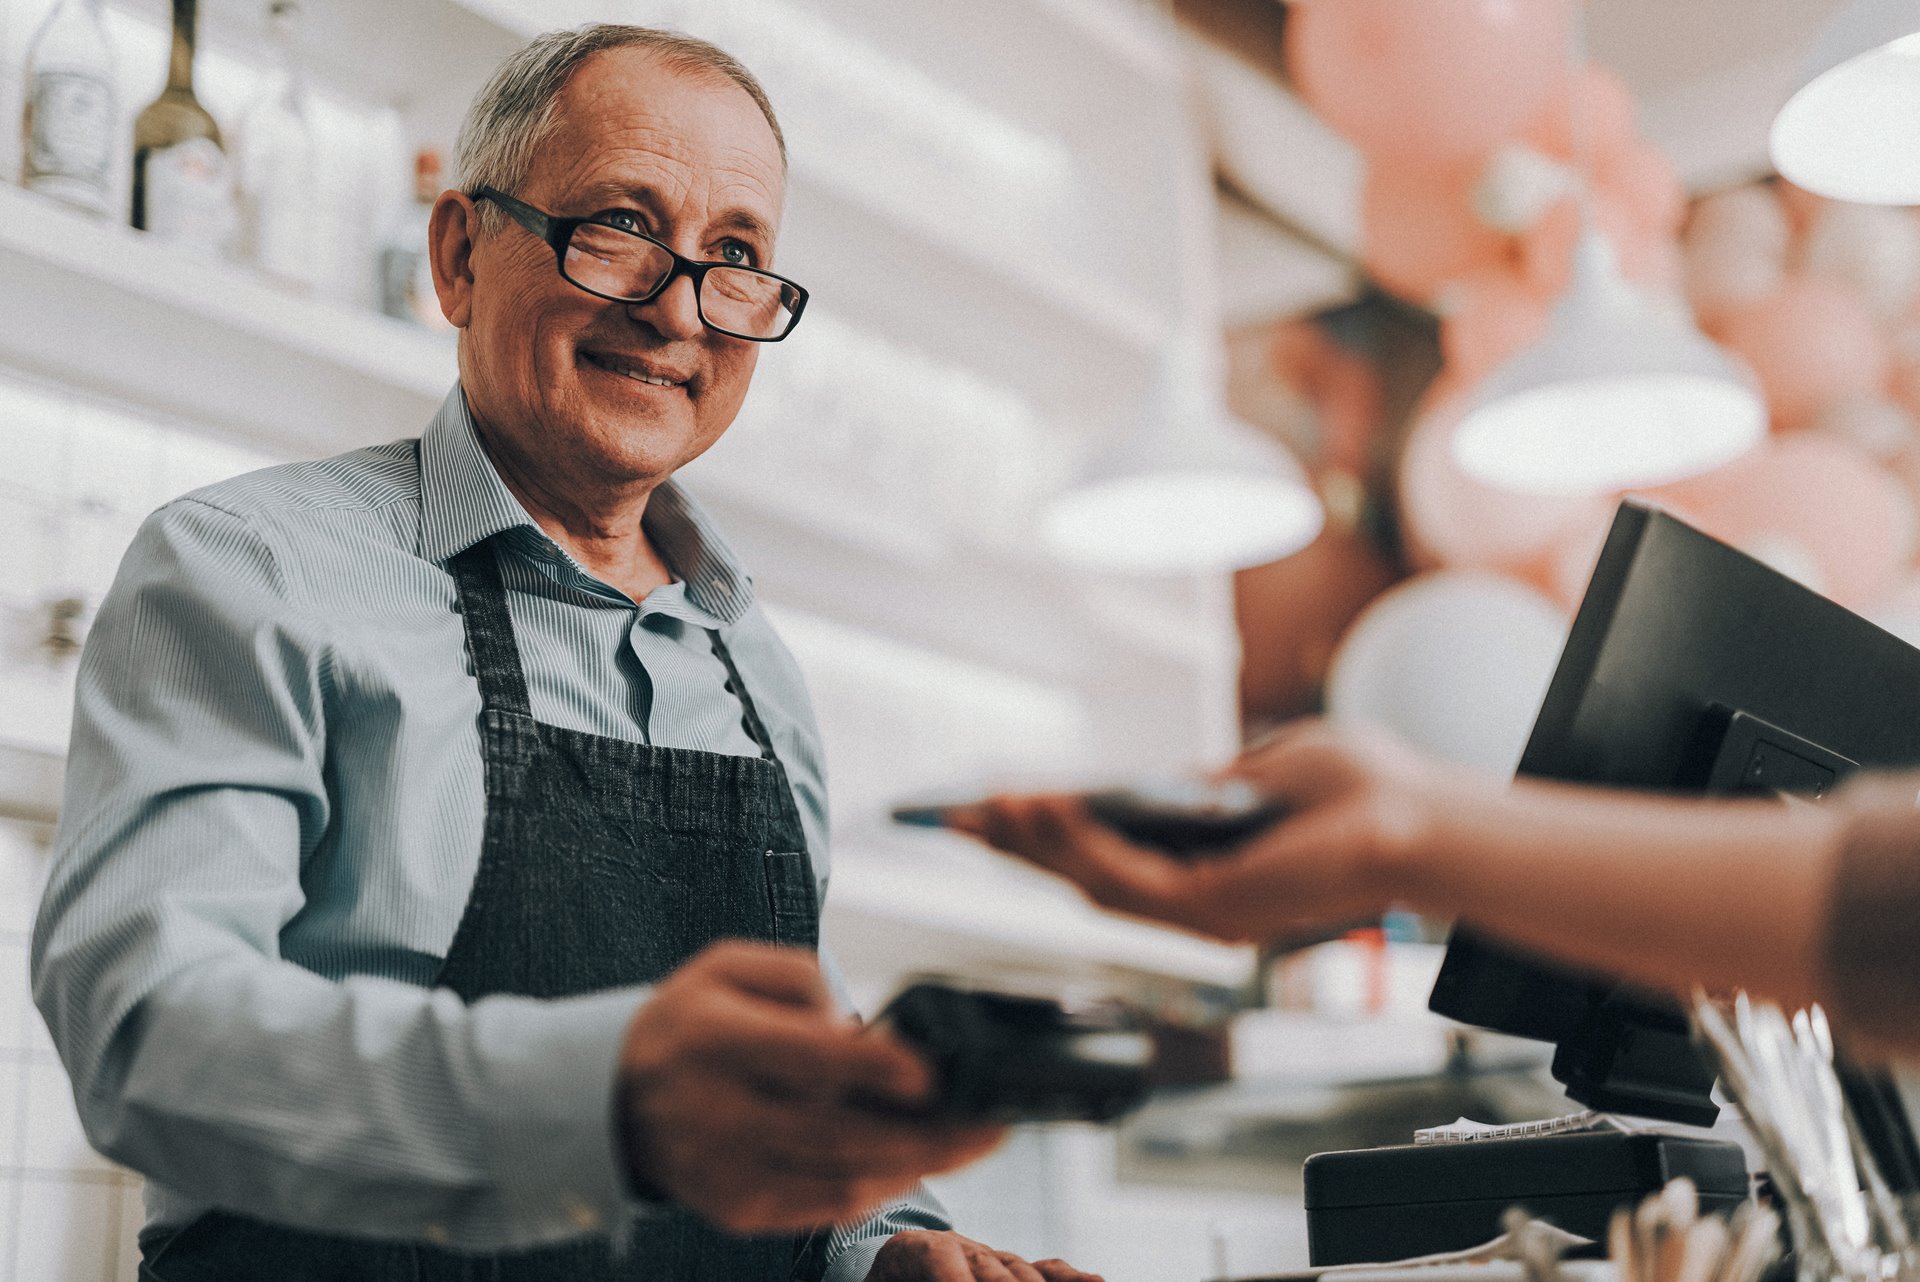 An older man smiles as helps a customer at a cash register.